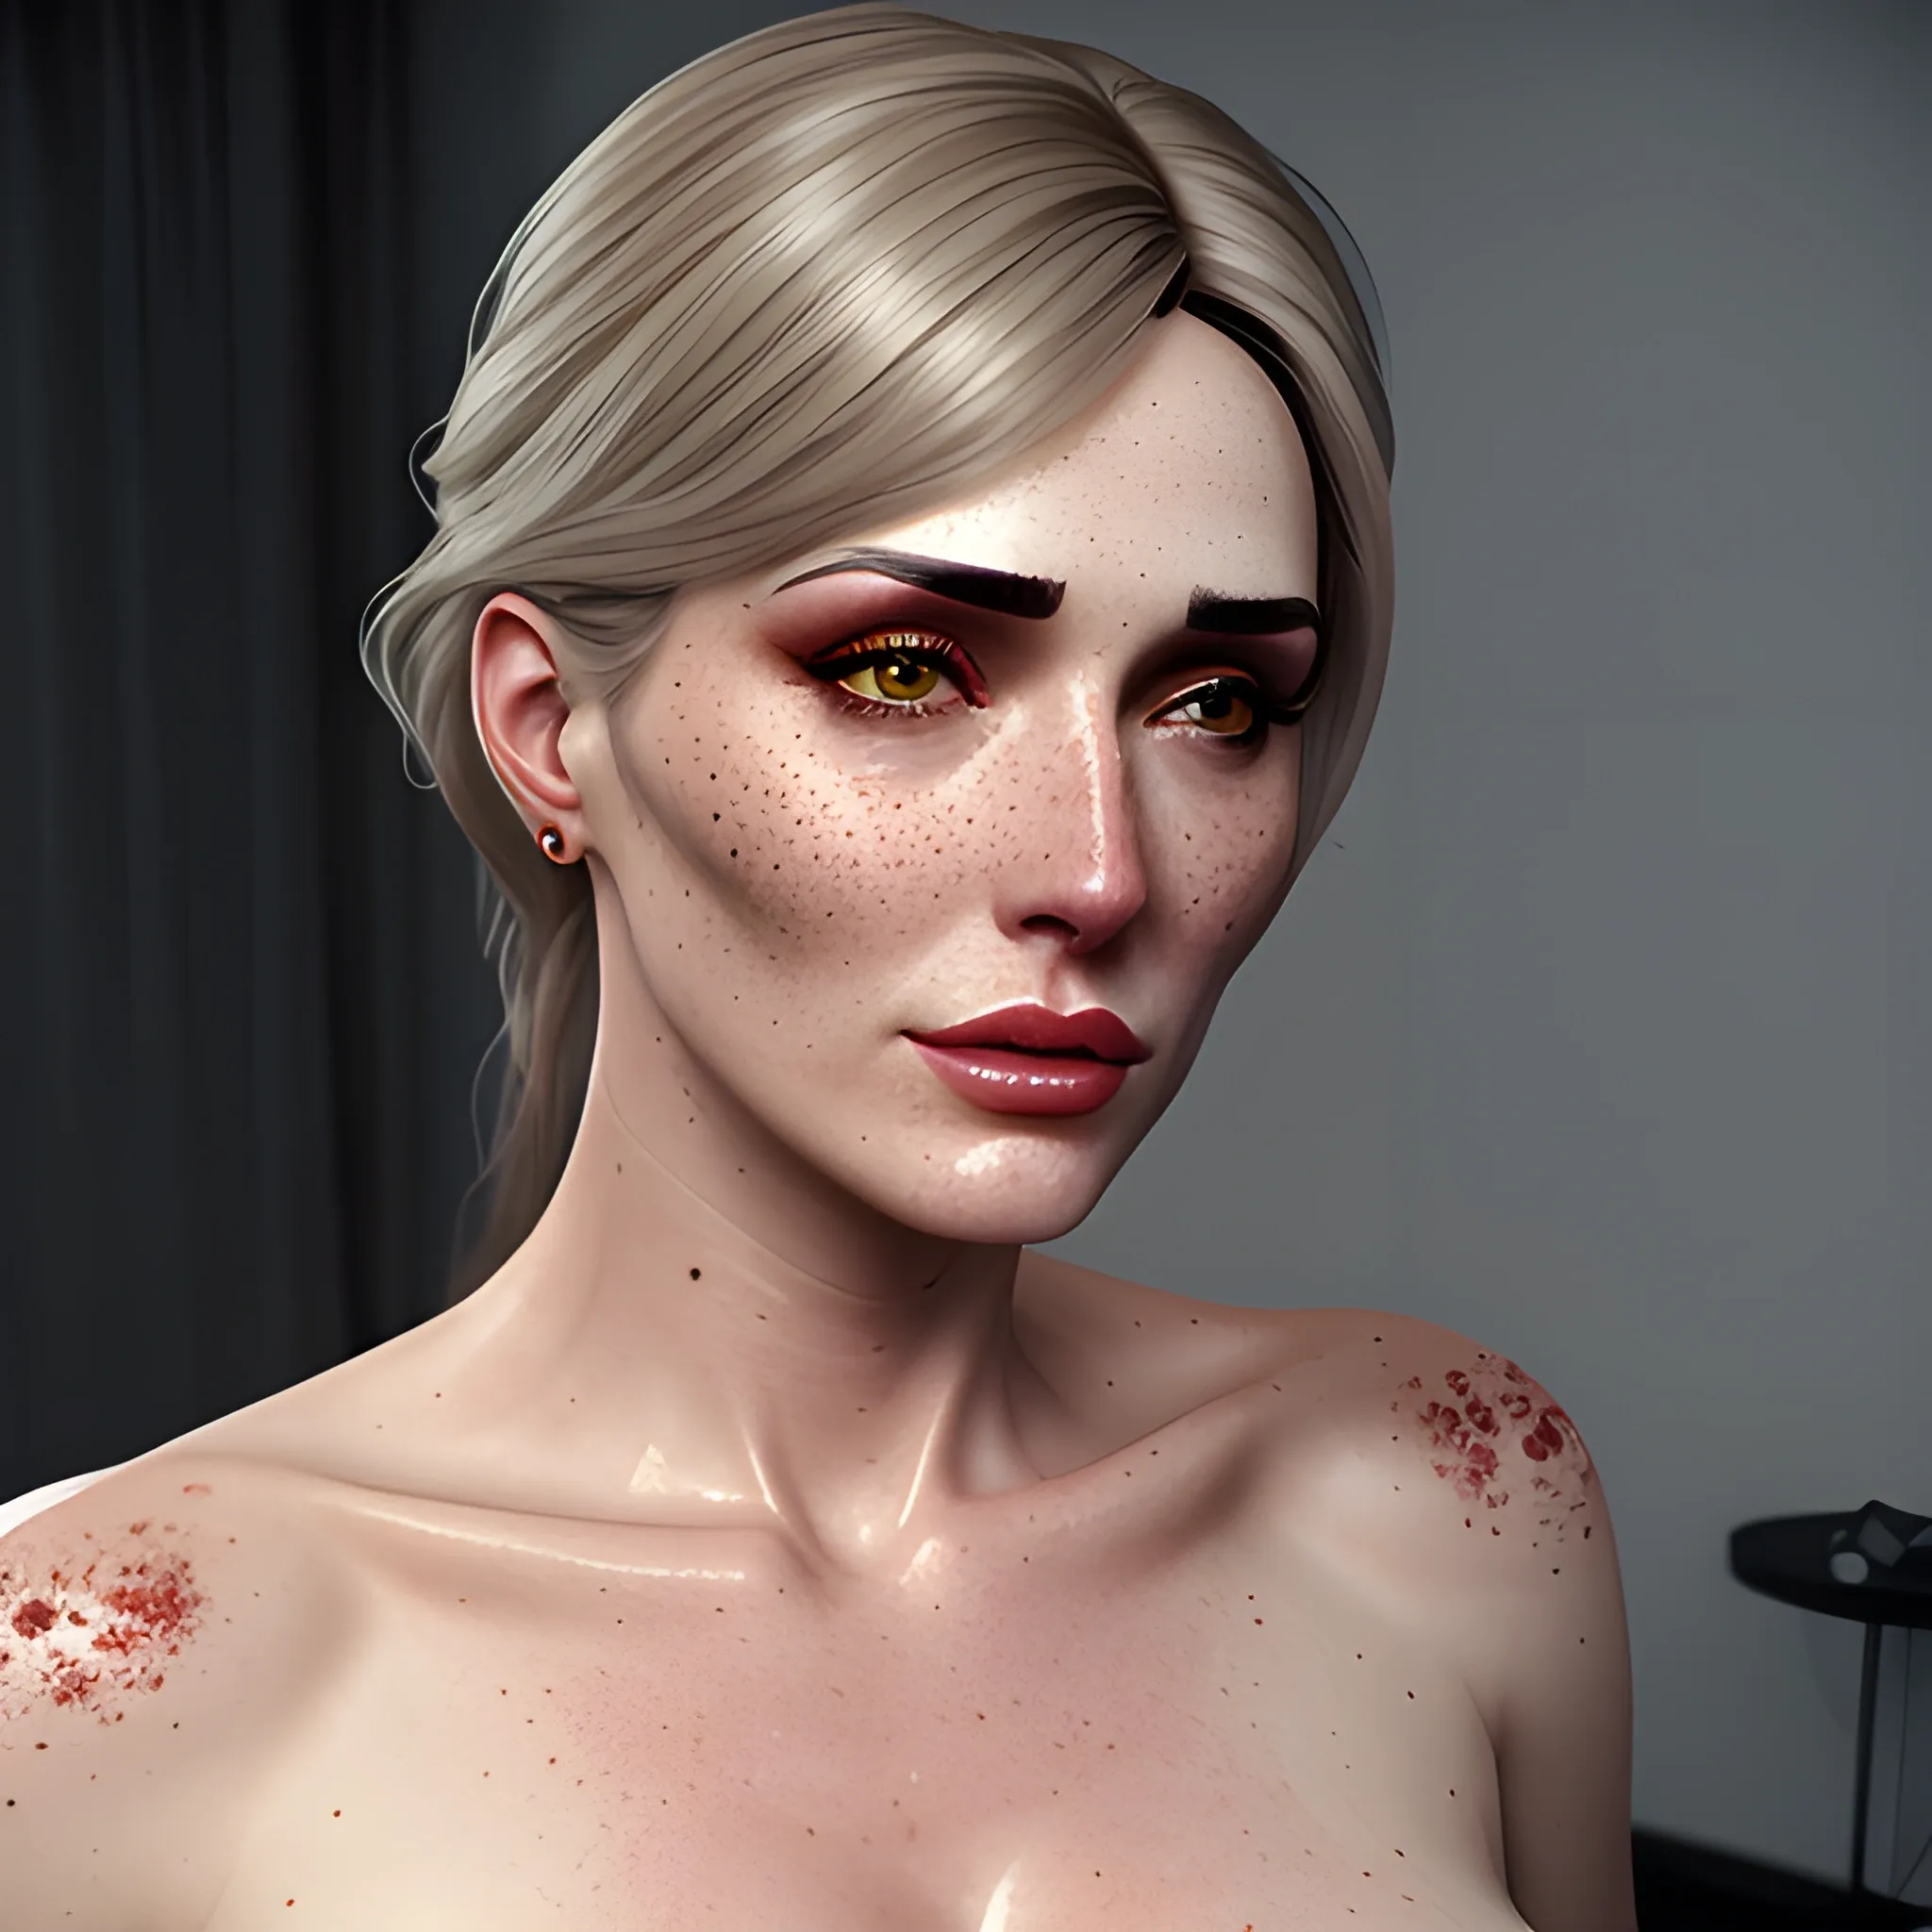 Girl Sex With Great Detail Real Life Skin Freckles 8 K Unr